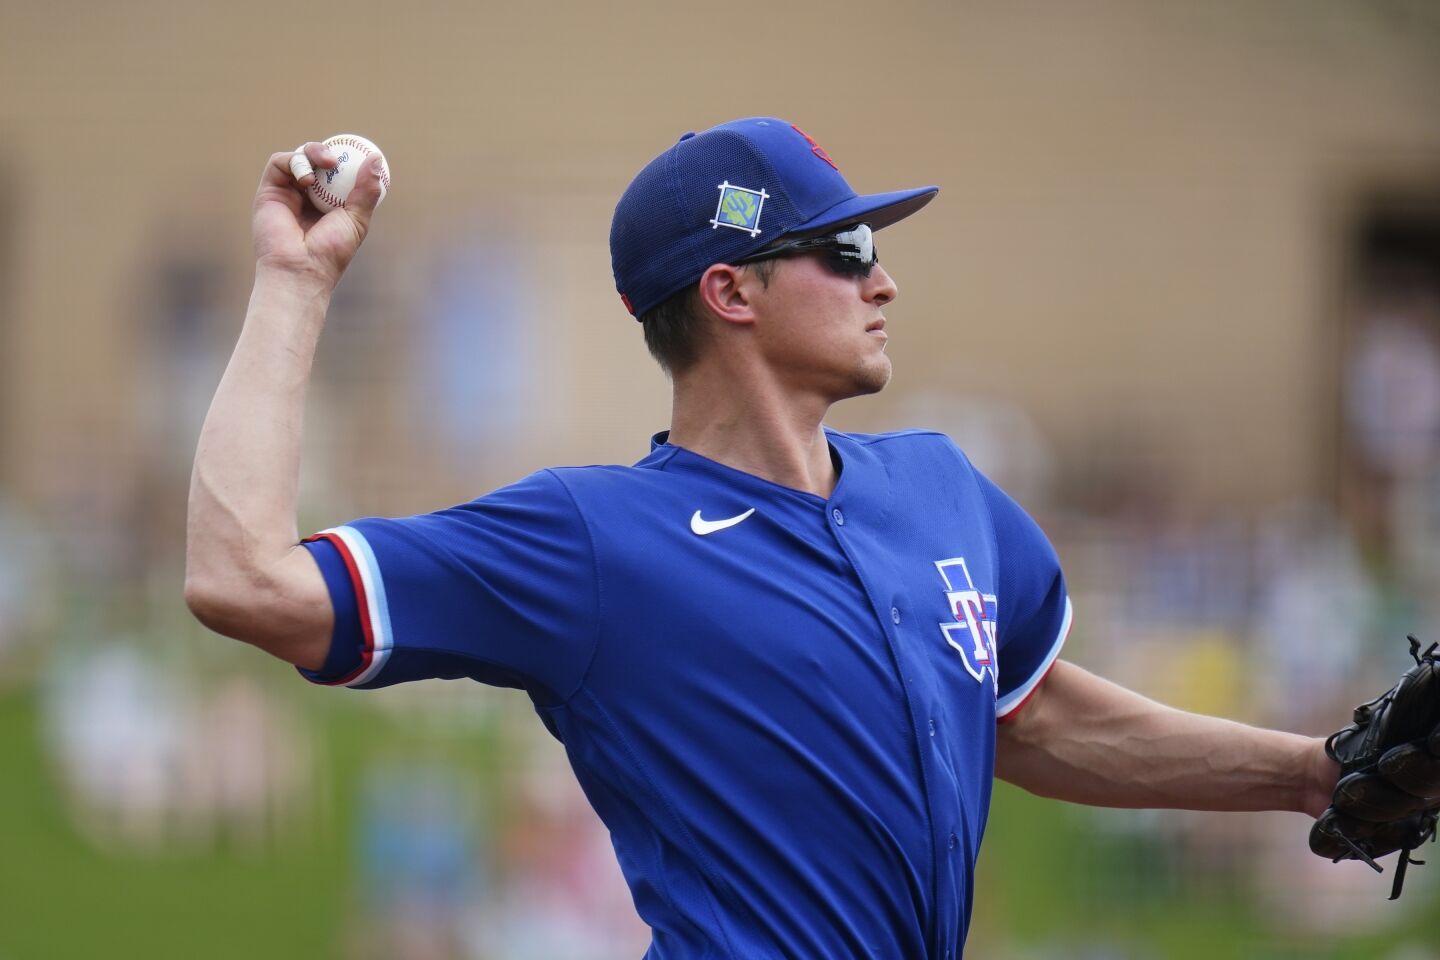 22 | Texas Rangers (60-102, 5th in AL West)The new-look Rangers, with Corey Seager and Marcus Semien in the middle of the diamond and Jon Gray starting on opening day, still have a giant hill to climb in the loaded in AL West.